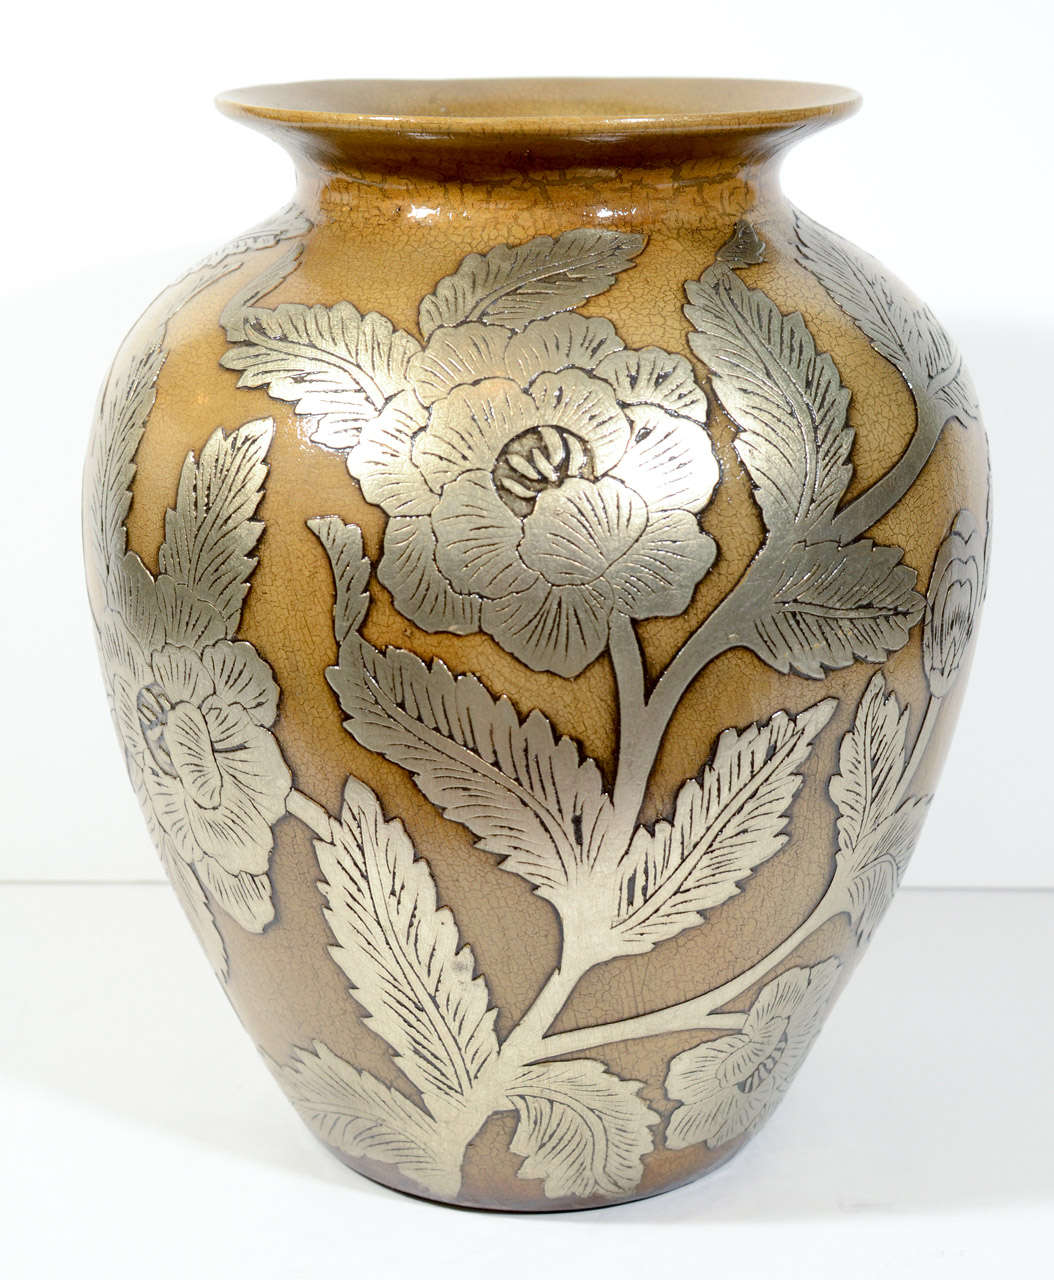 Ceramic Pottery Urn Vase with Relief Designs in Silver Leaf 2